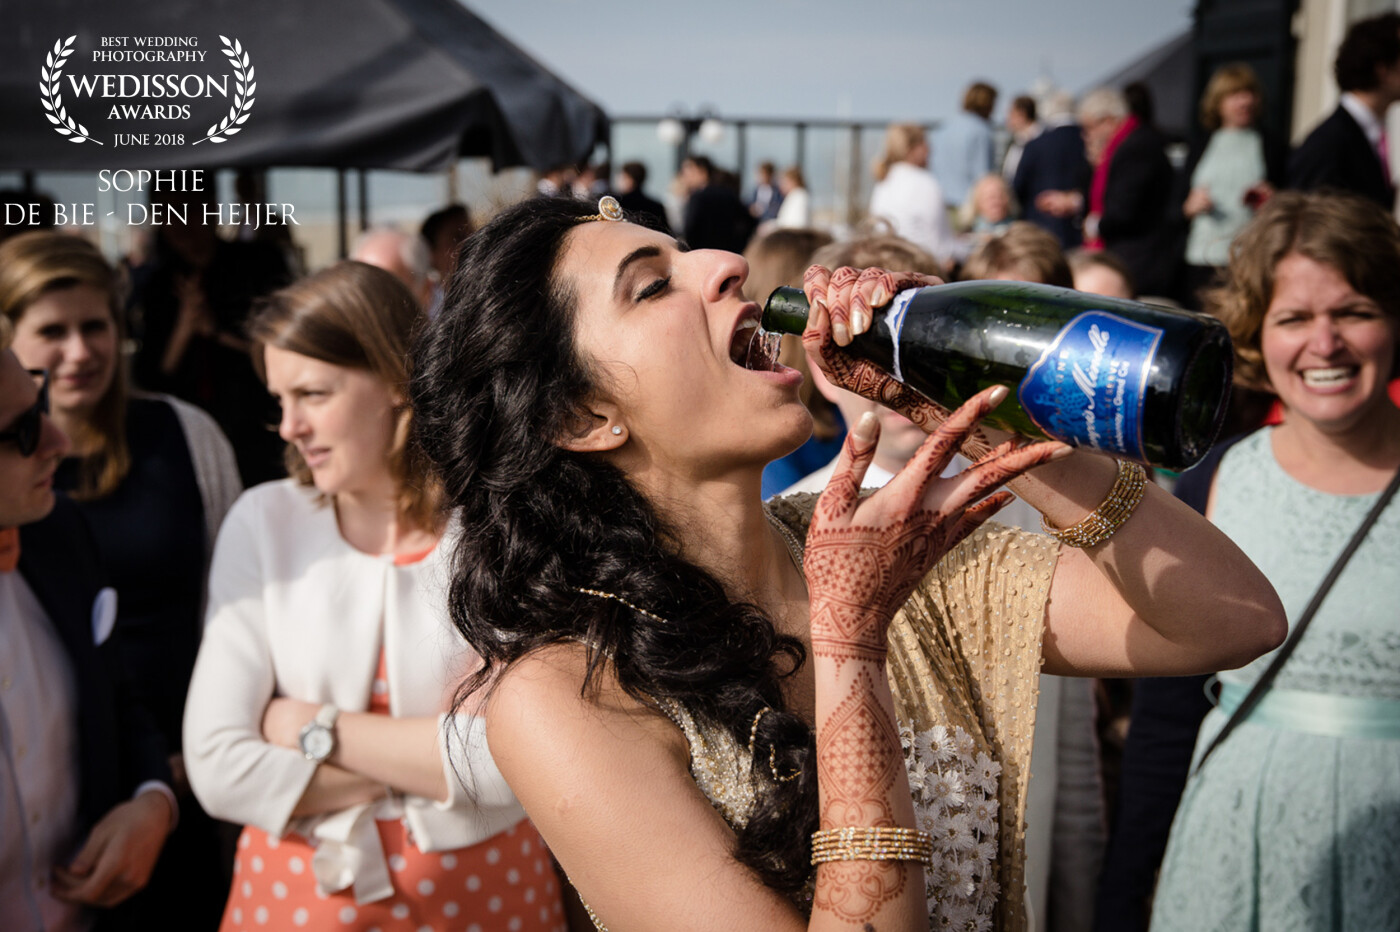 On this Dutch and Indian wedding, I captured this photo of the bride. The groom had just opened the bottle with a knife he had been given by his study friends. Since the bottle now had sharp edges, the bride went all in and poured the champagne right in her mouth. Still a lady. 